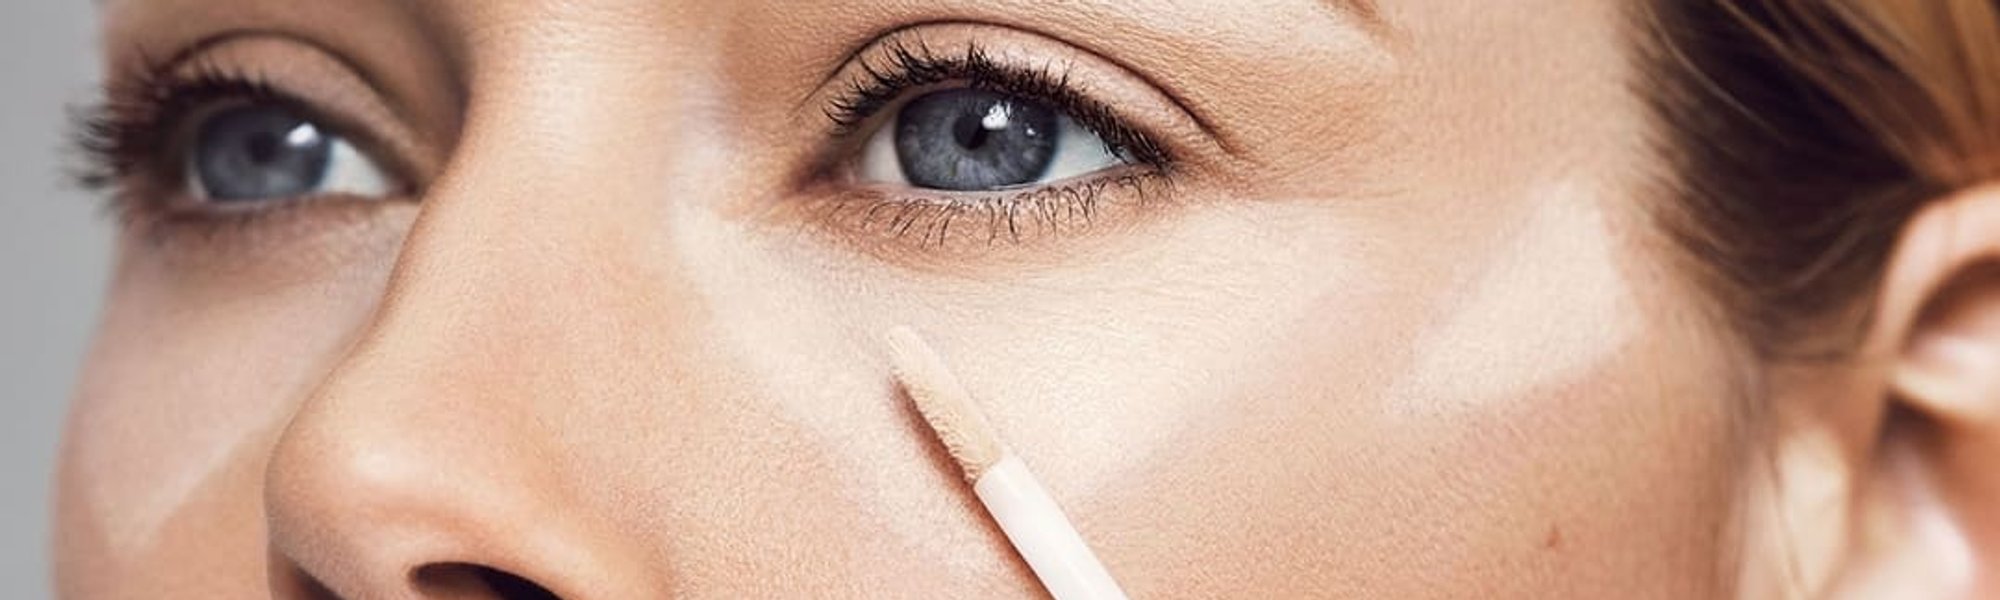 https://www.lorealparis.ca/-/media/project/loreal/brand-sites/oap/americas/ca/articles/blog/how-to-pick-the-right-concealer-for-your-skin-tone_1080x476.jpg?rev=28f9b8fceba04e22a43e897c1550552e&cx=0.55&cy=0.34&cw=2000&ch=600&hash=FB762AE8A9A1E1A68708A121D65563C863047FF2